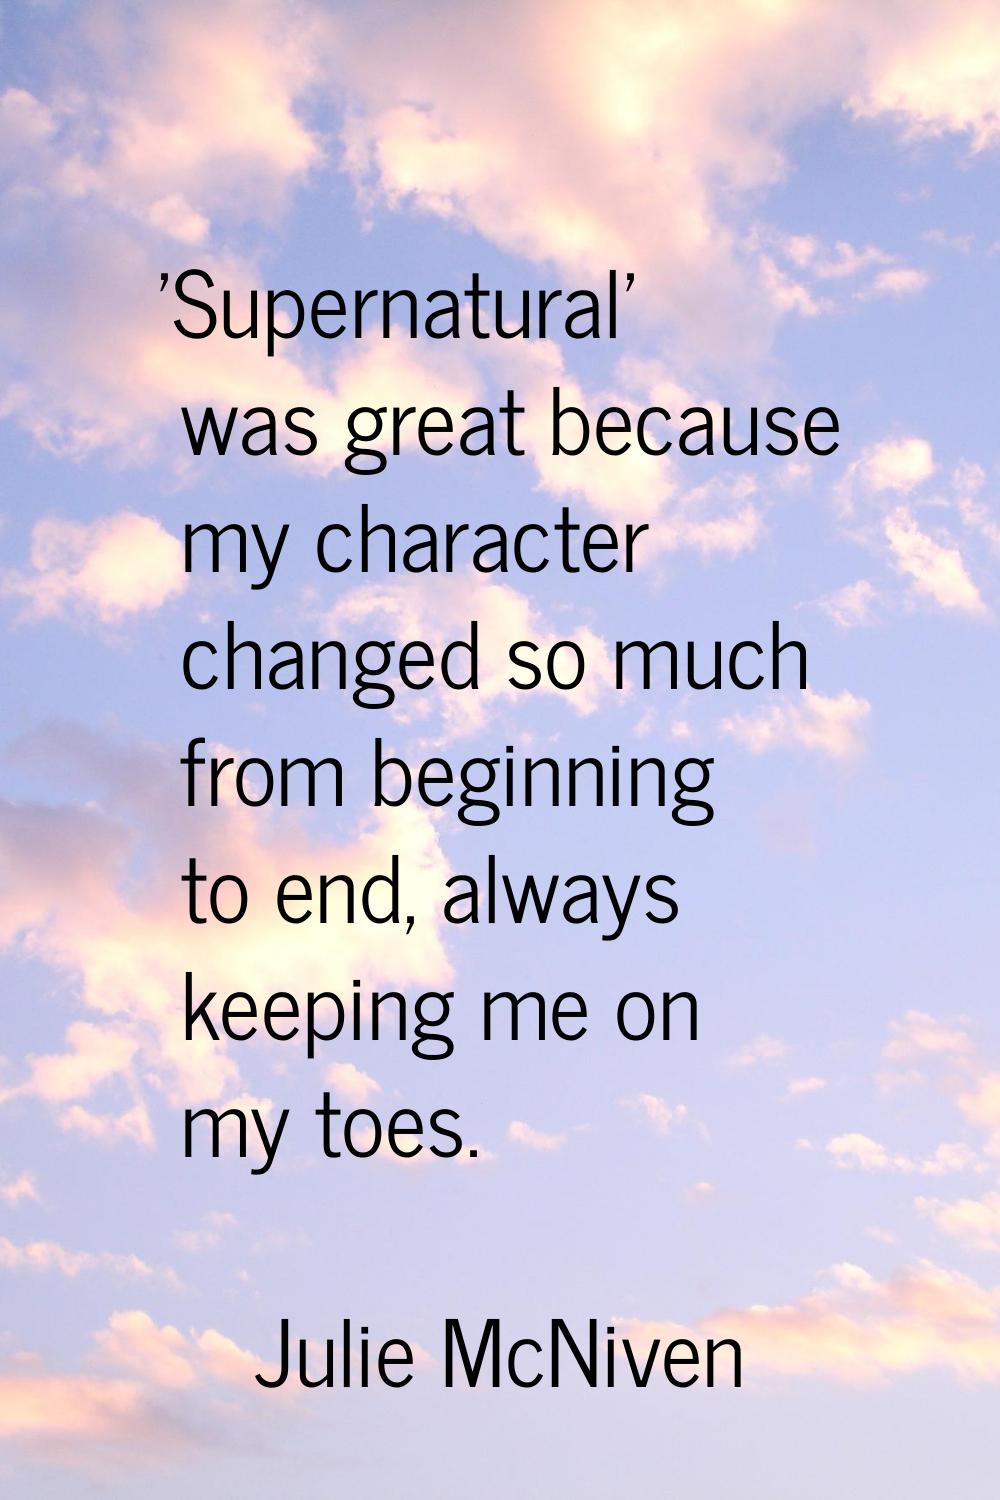 'Supernatural' was great because my character changed so much from beginning to end, always keeping